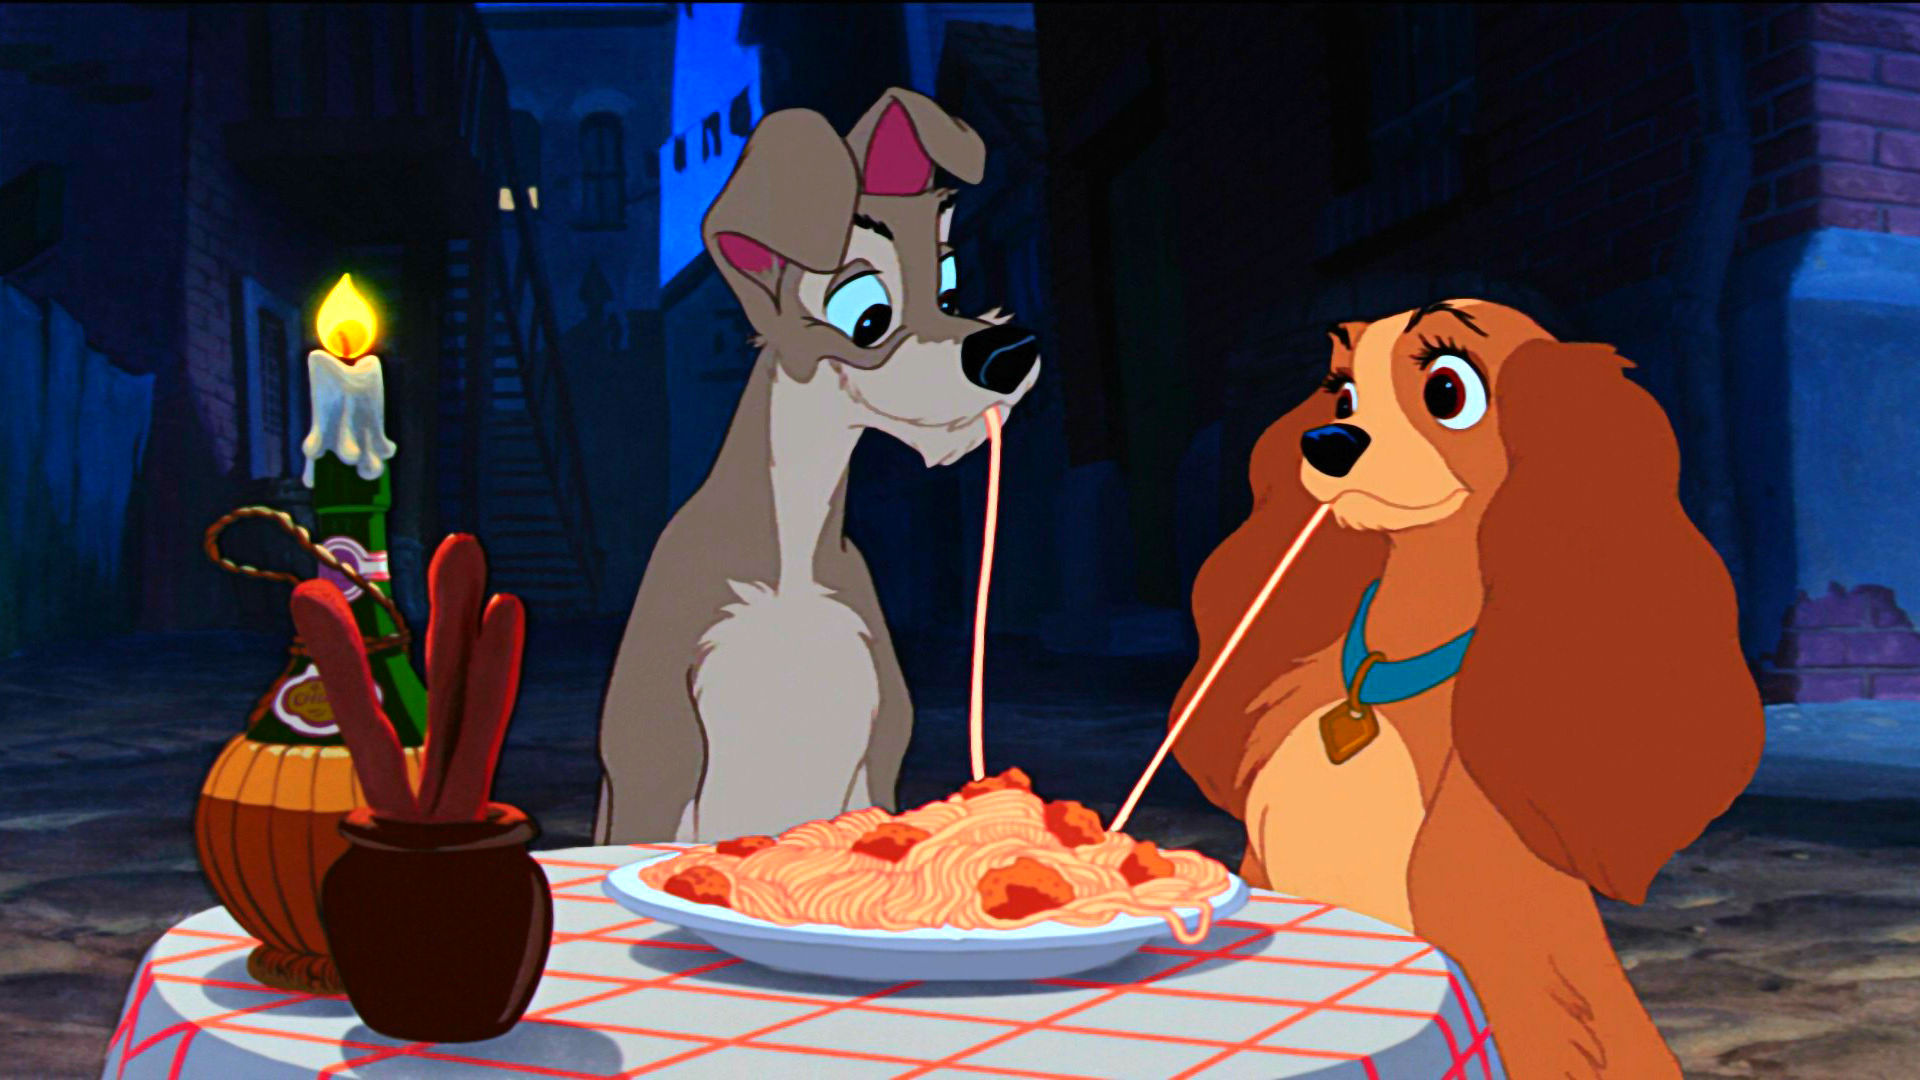 Nice Images Collection: Lady And The Tramp Desktop Wallpapers